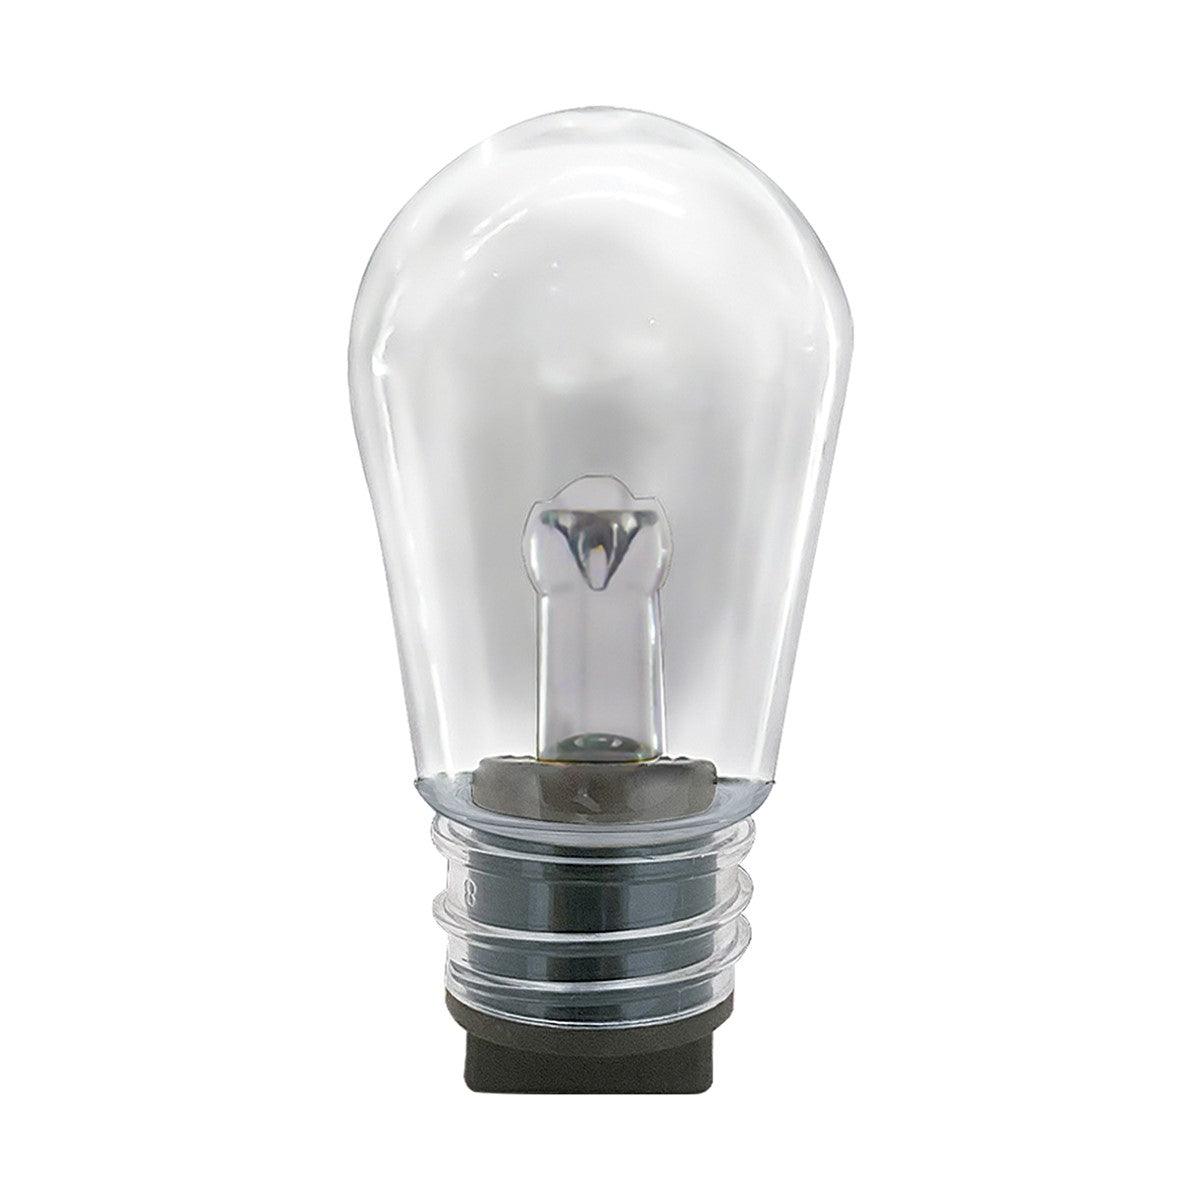 Starfish S14 LED Decorative Bulb, 25W Equivalent, 2700K RGBW Color Changing, 2 Per Box - Bees Lighting